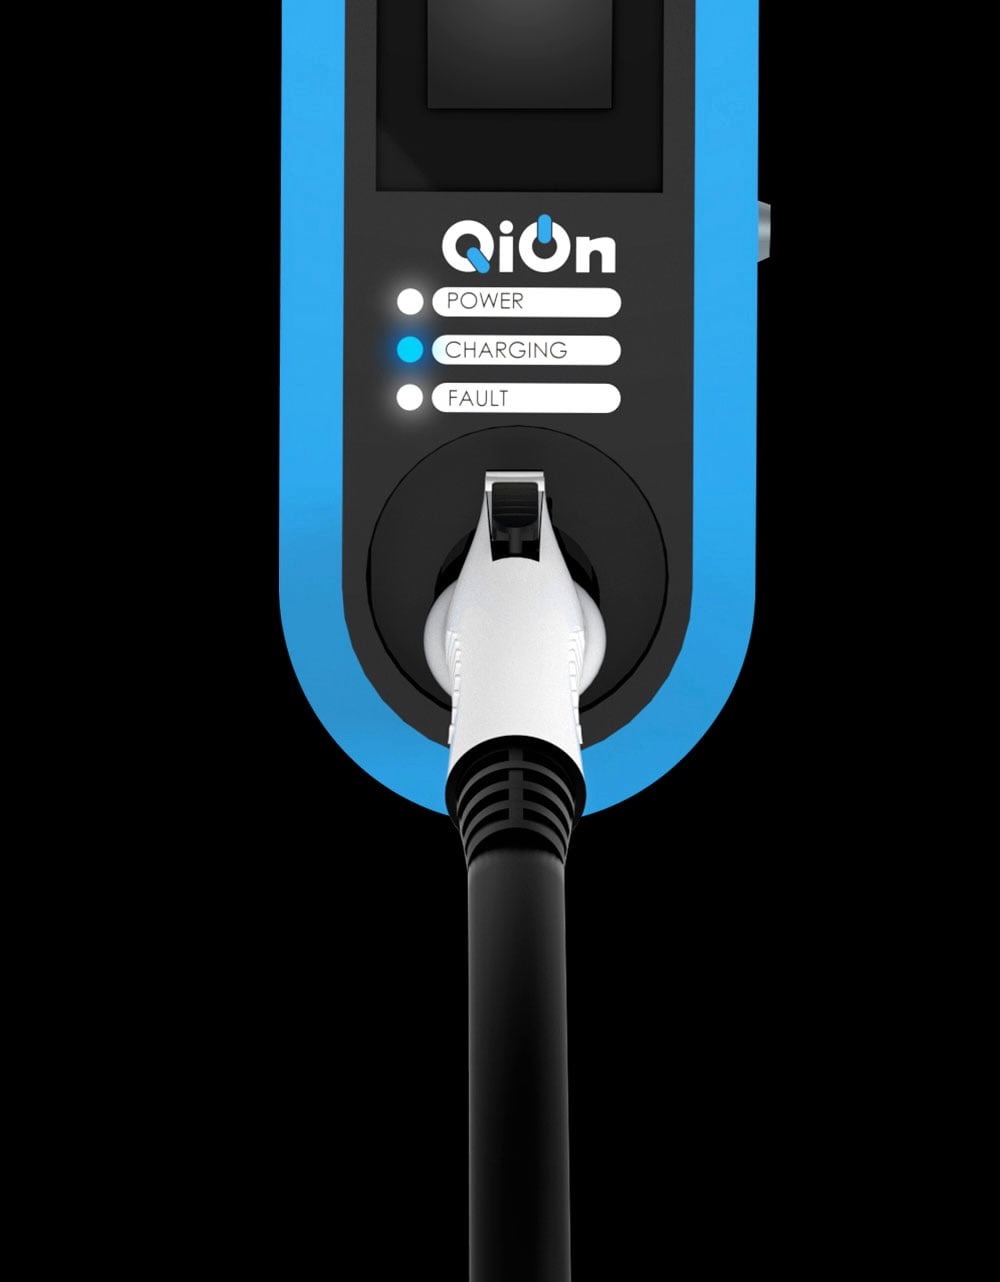 QiOn's Q charger zoomed on the plug feature and showing the charging icon